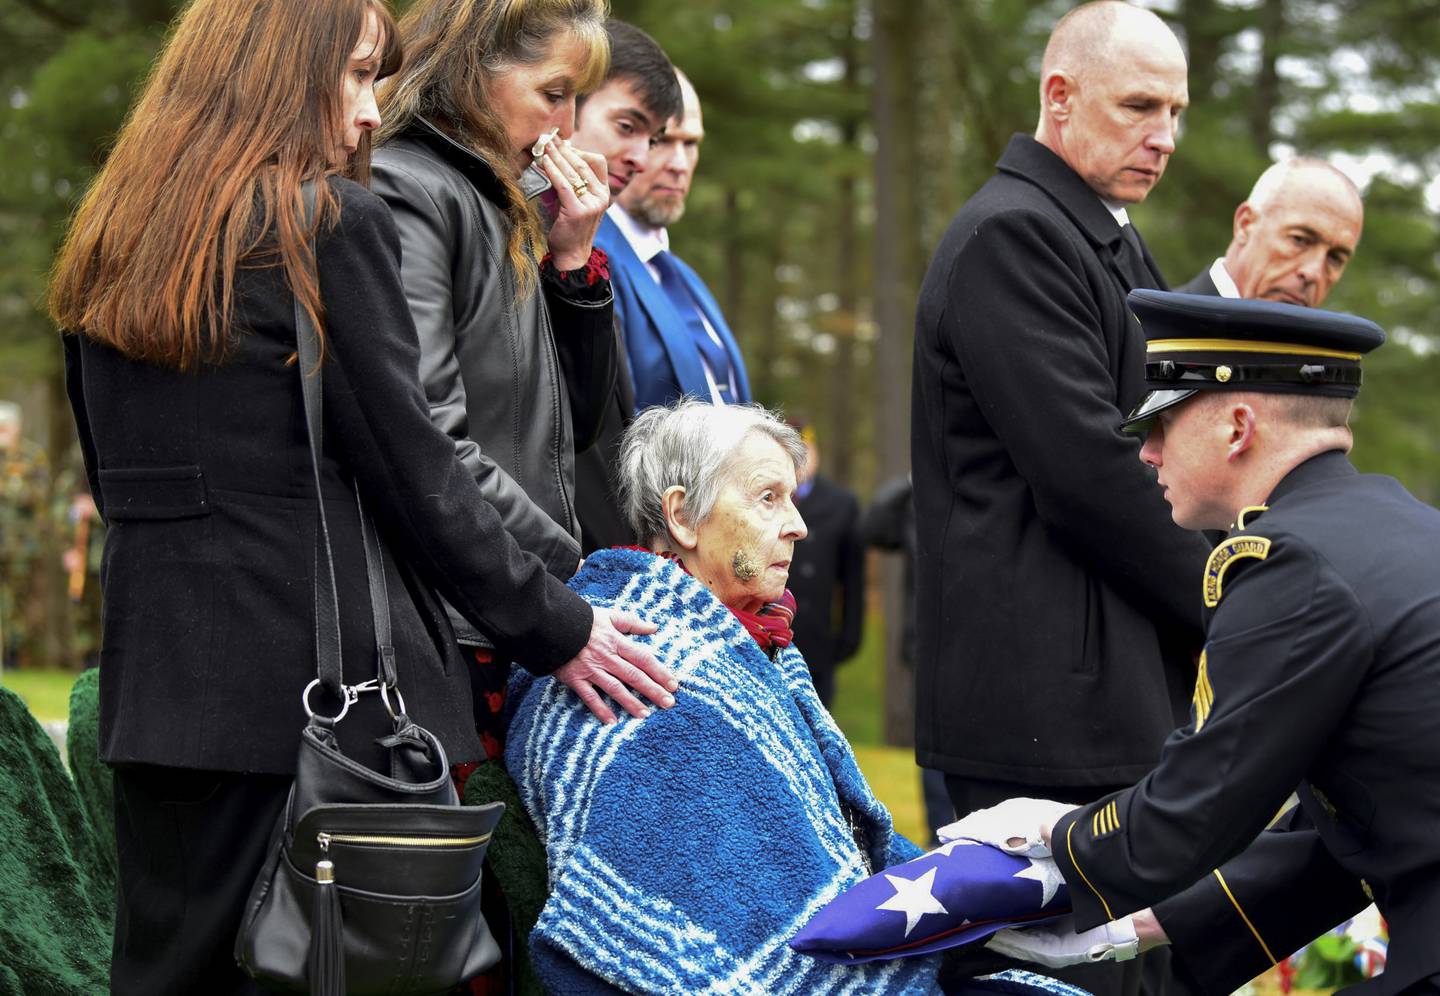 Patricia Lyons, 90, the only remaining sibling of Army Sgt. Alfred Sidney, is handed the American flag from his burial service in Littleton, N.H., on Thursday, Dec. 8, 2022.